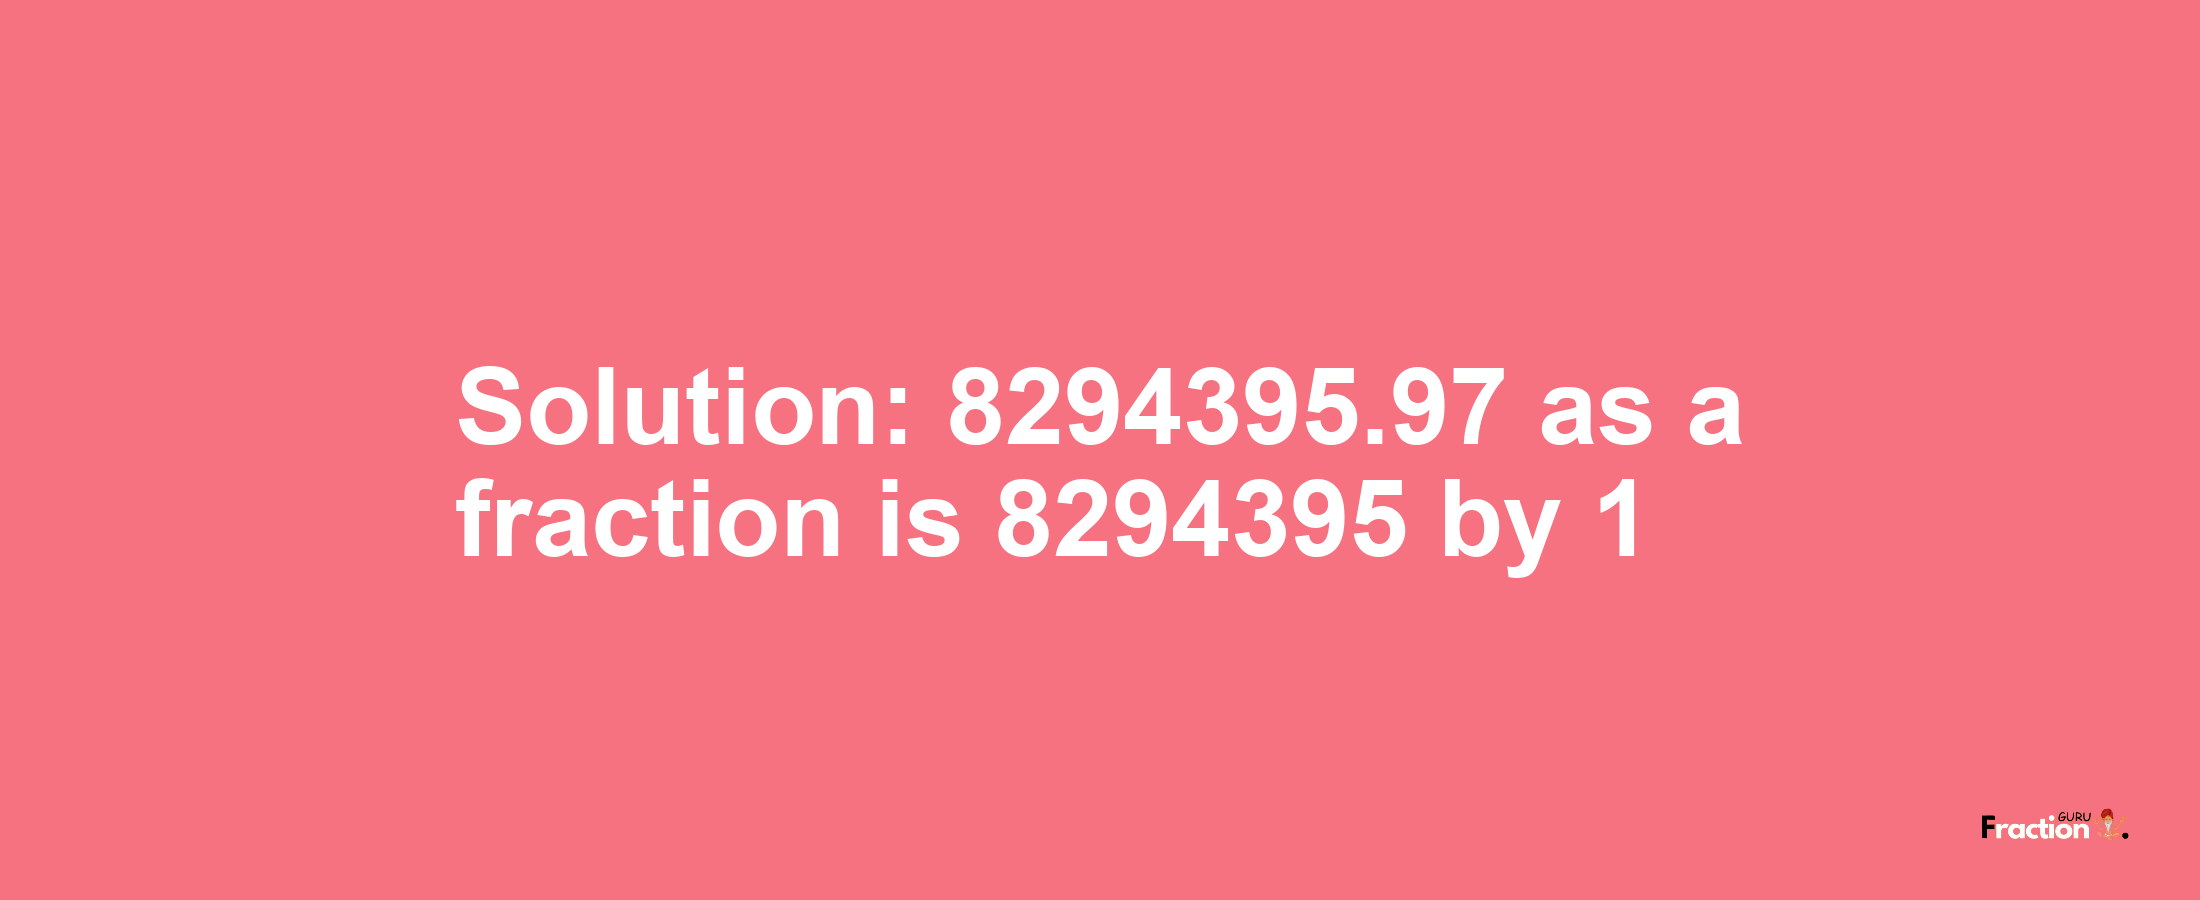 Solution:8294395.97 as a fraction is 8294395/1